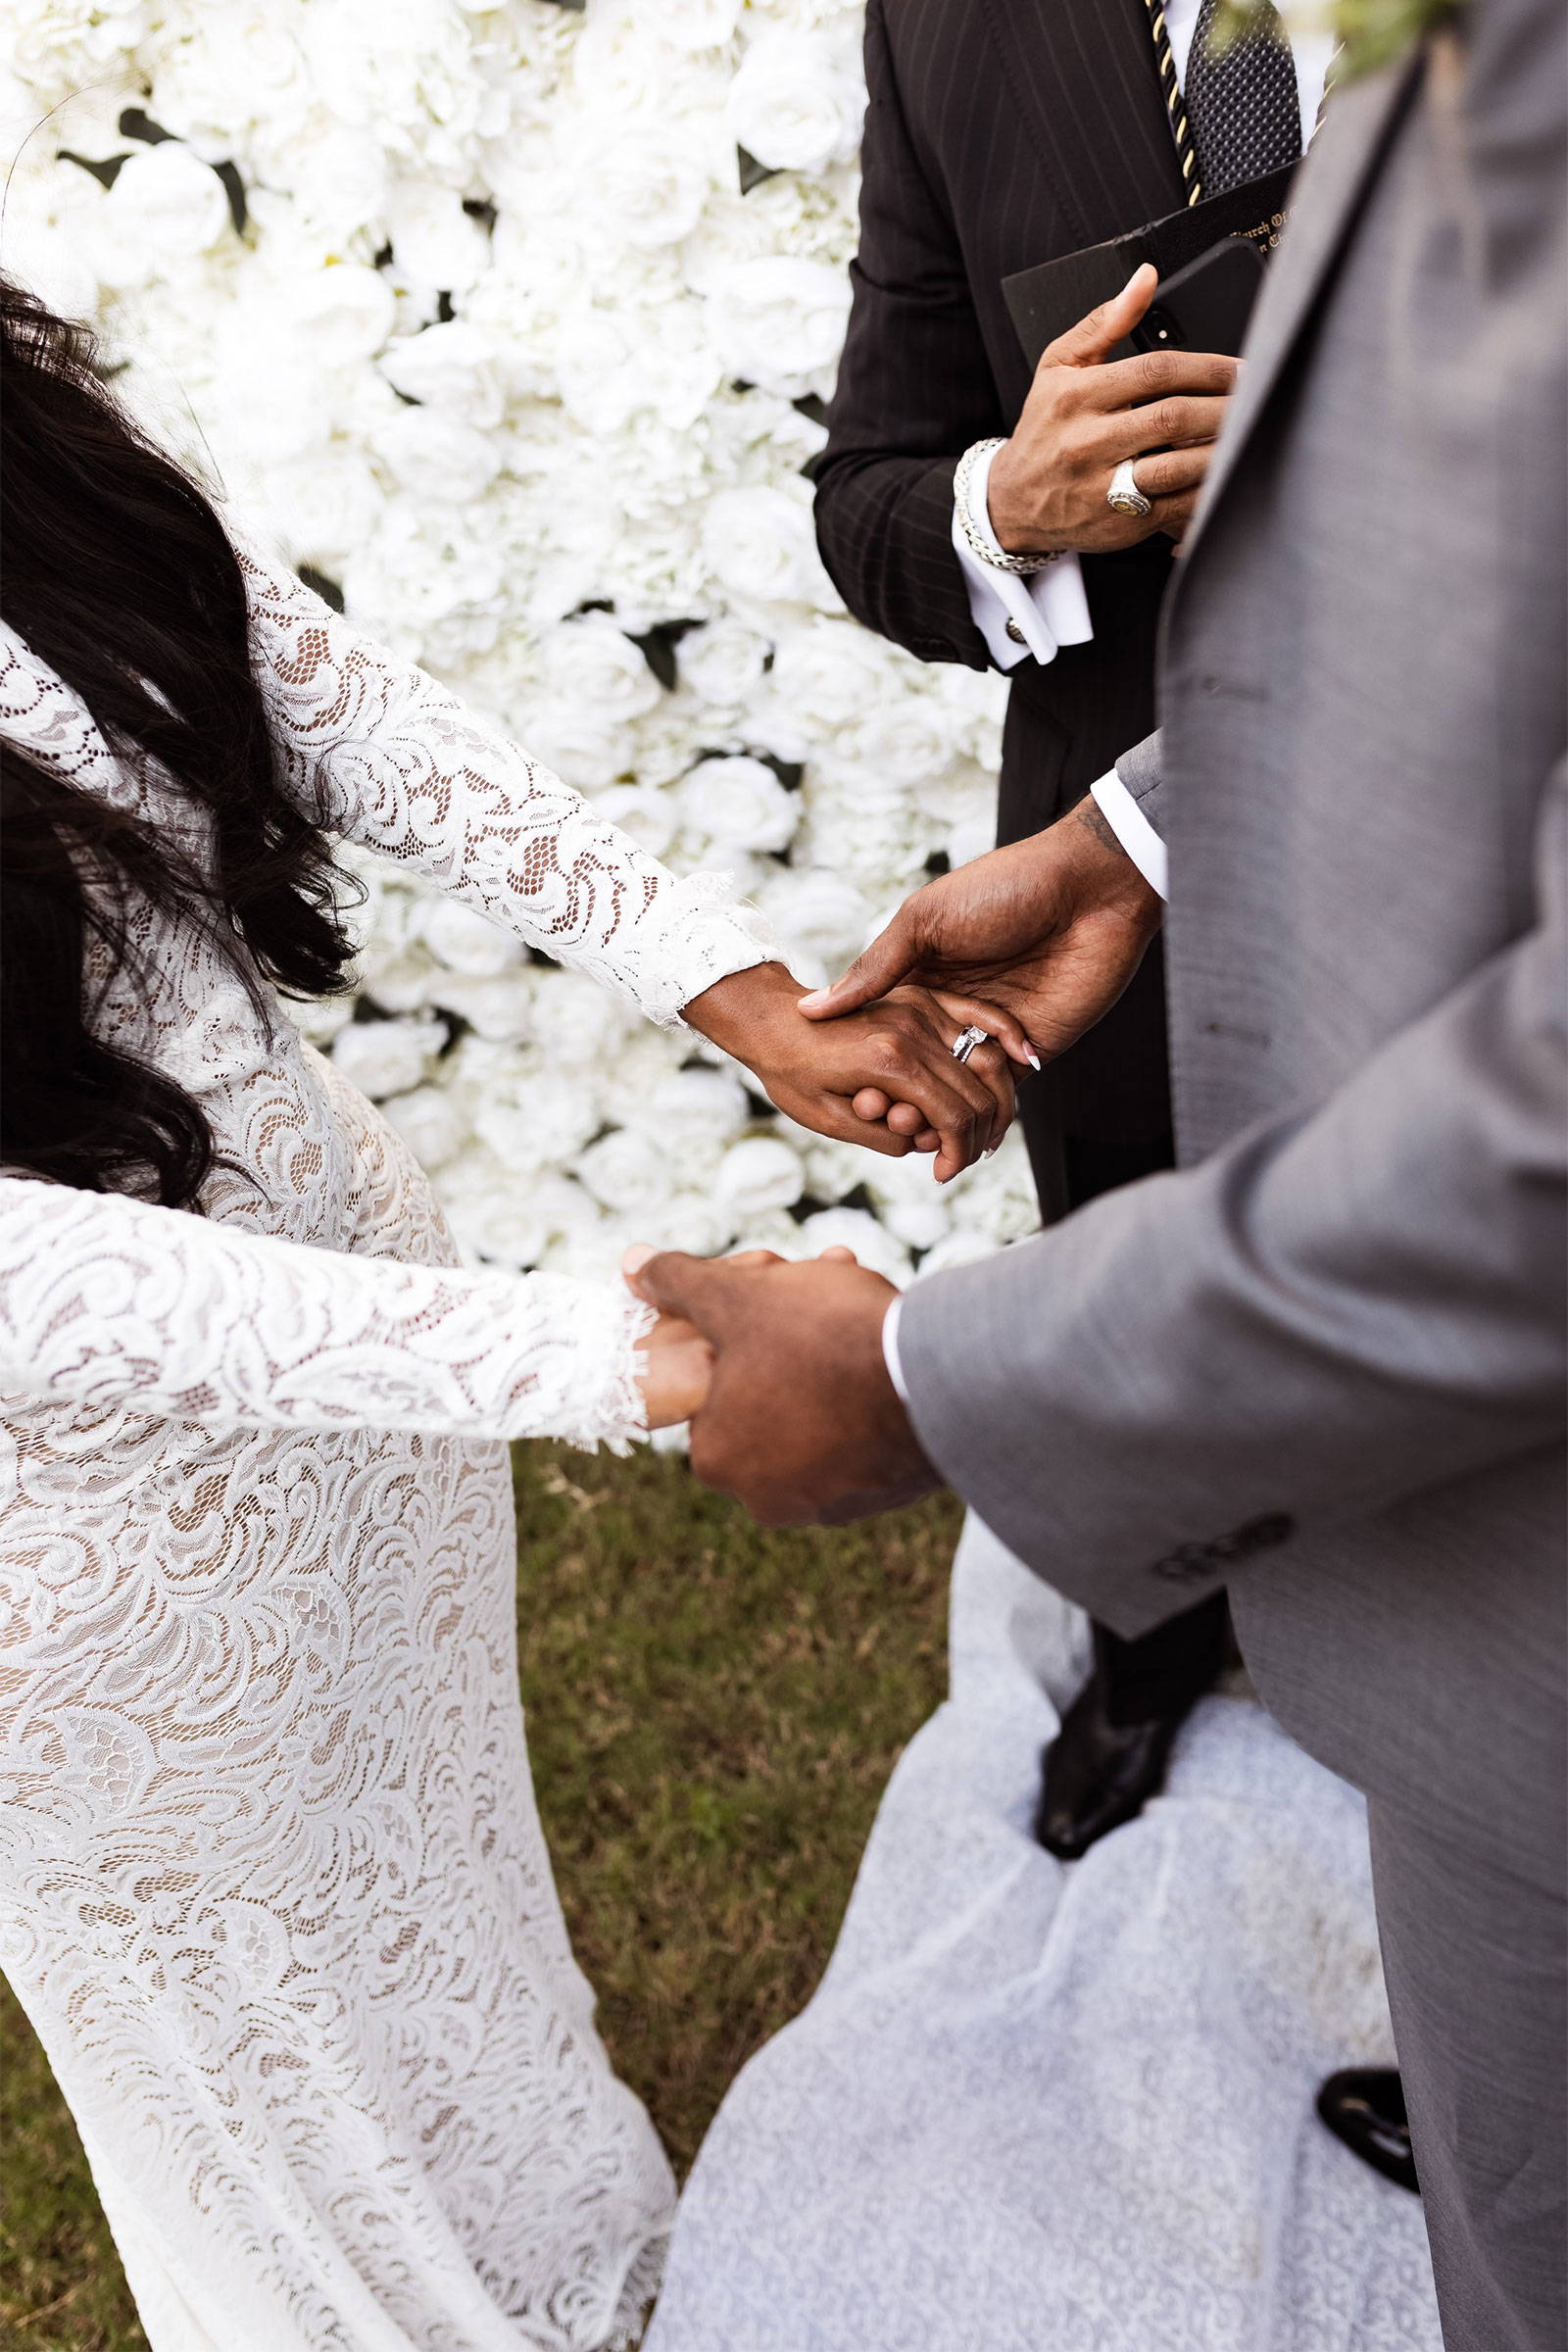 Holding hands at the wedding ceremony